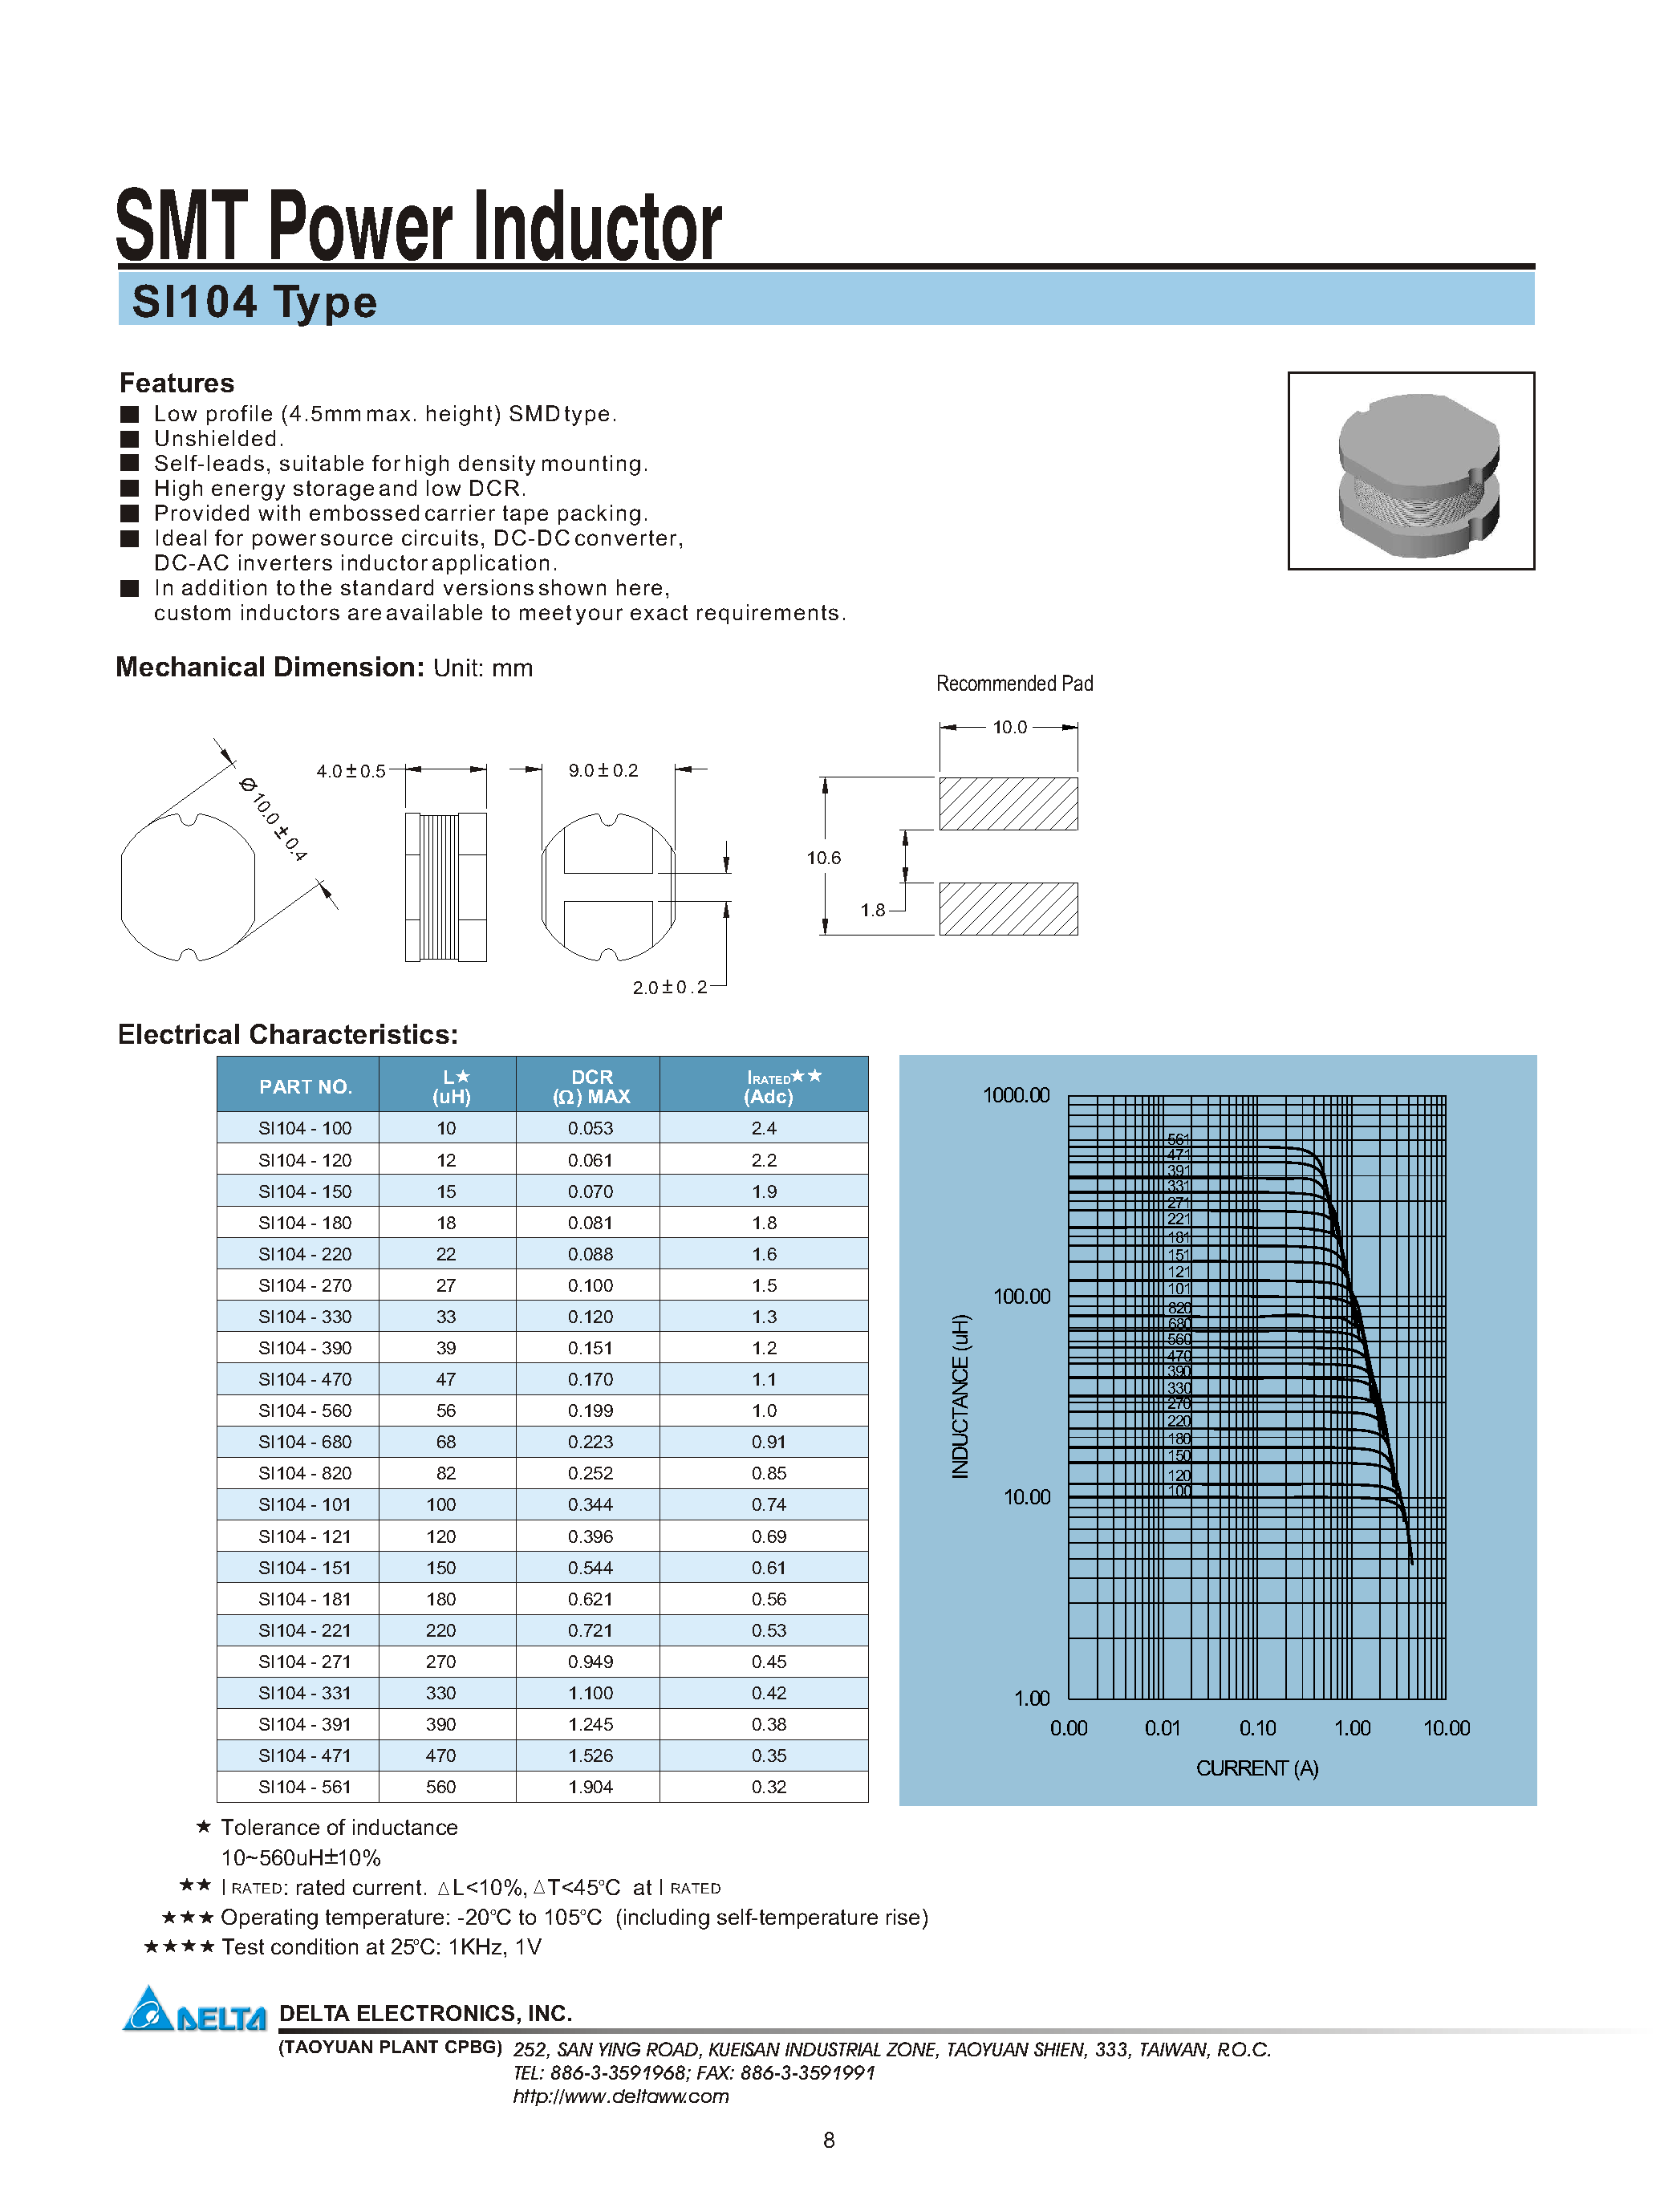 Datasheet SI104-271 - SMT Power Inductor page 1